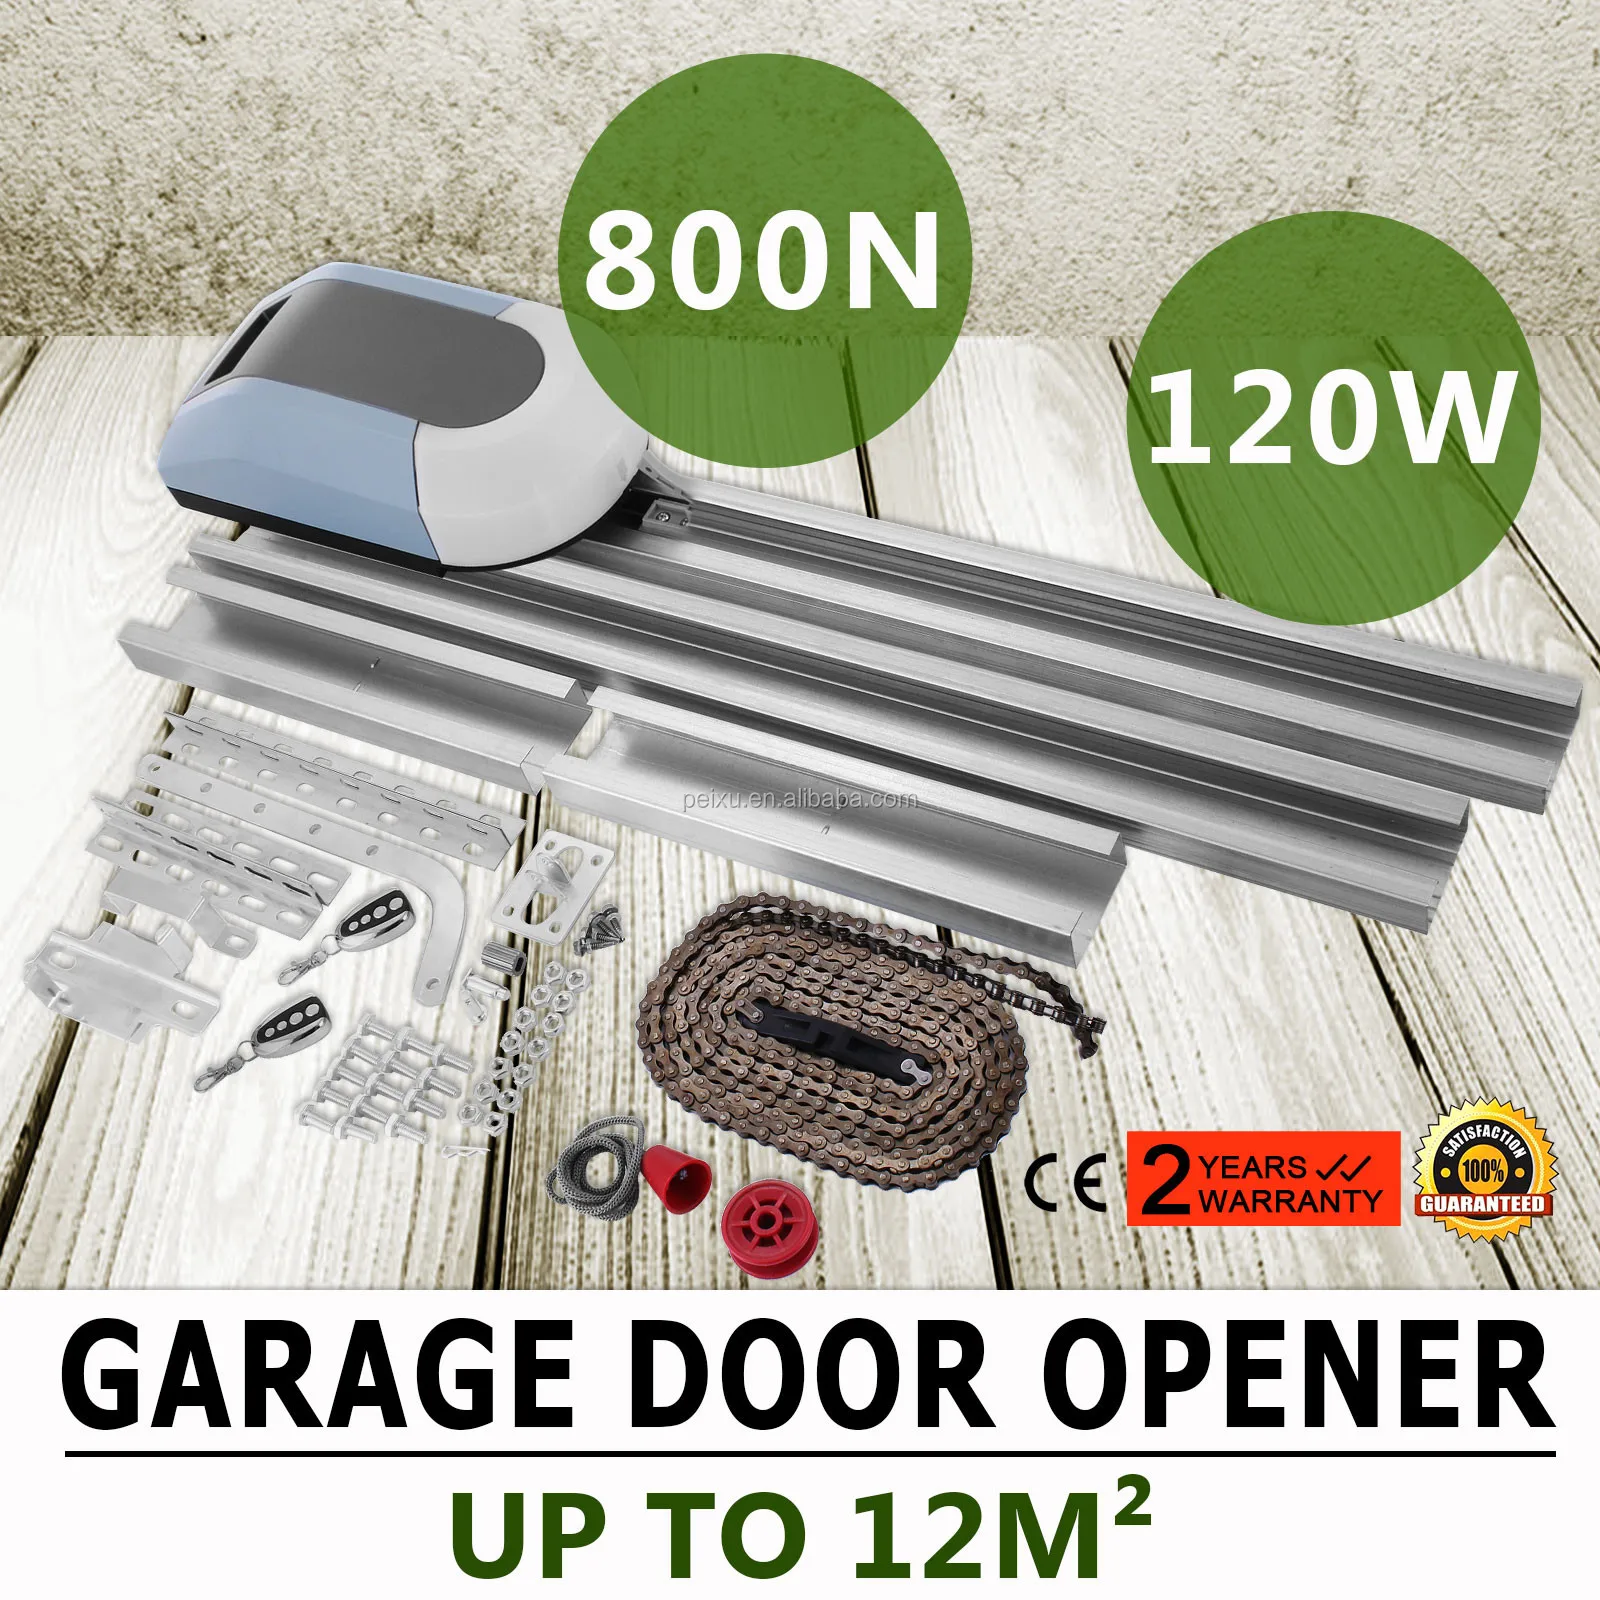 BRAND New Automatic Garage Door Opener With Featuring a Powerful AC Motor